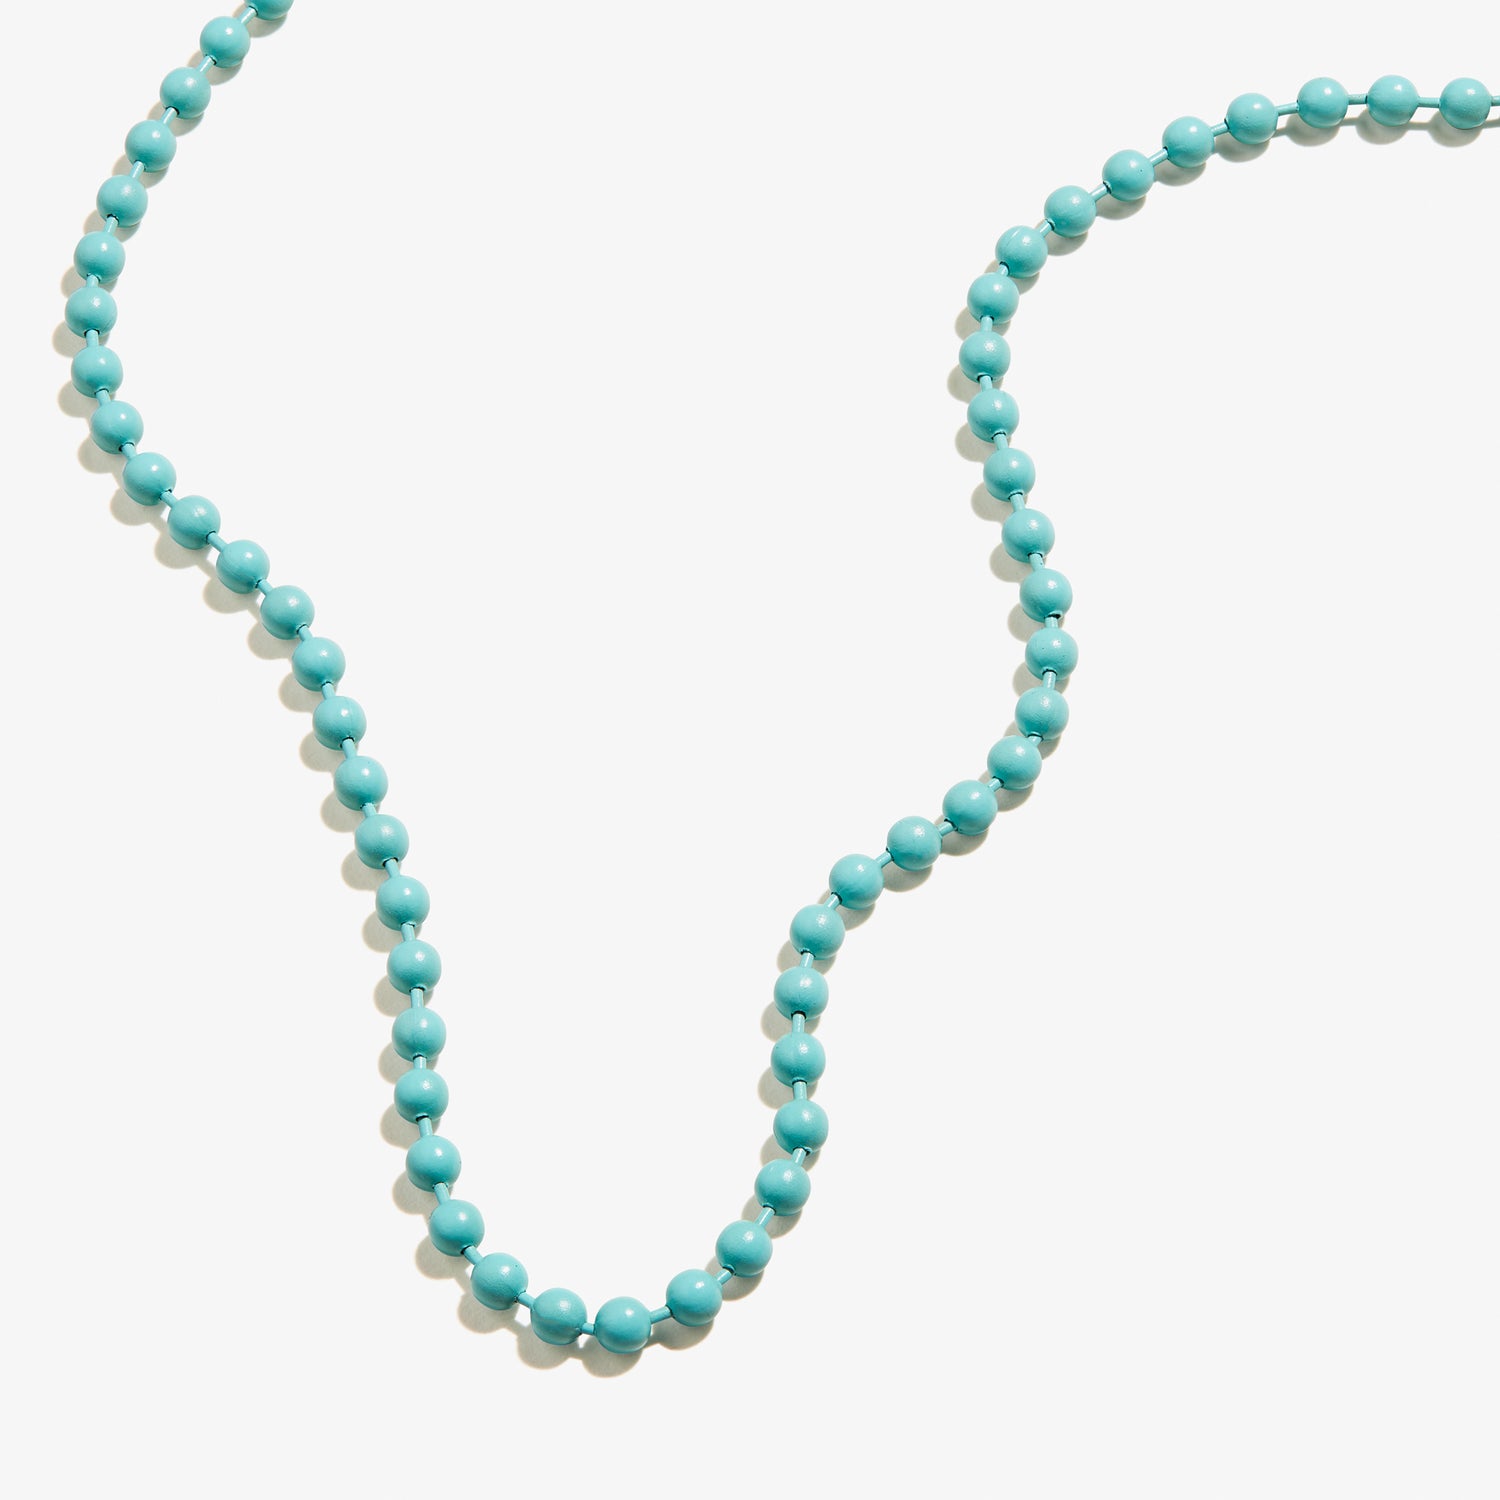 Ball Chain Necklace, Turquoise